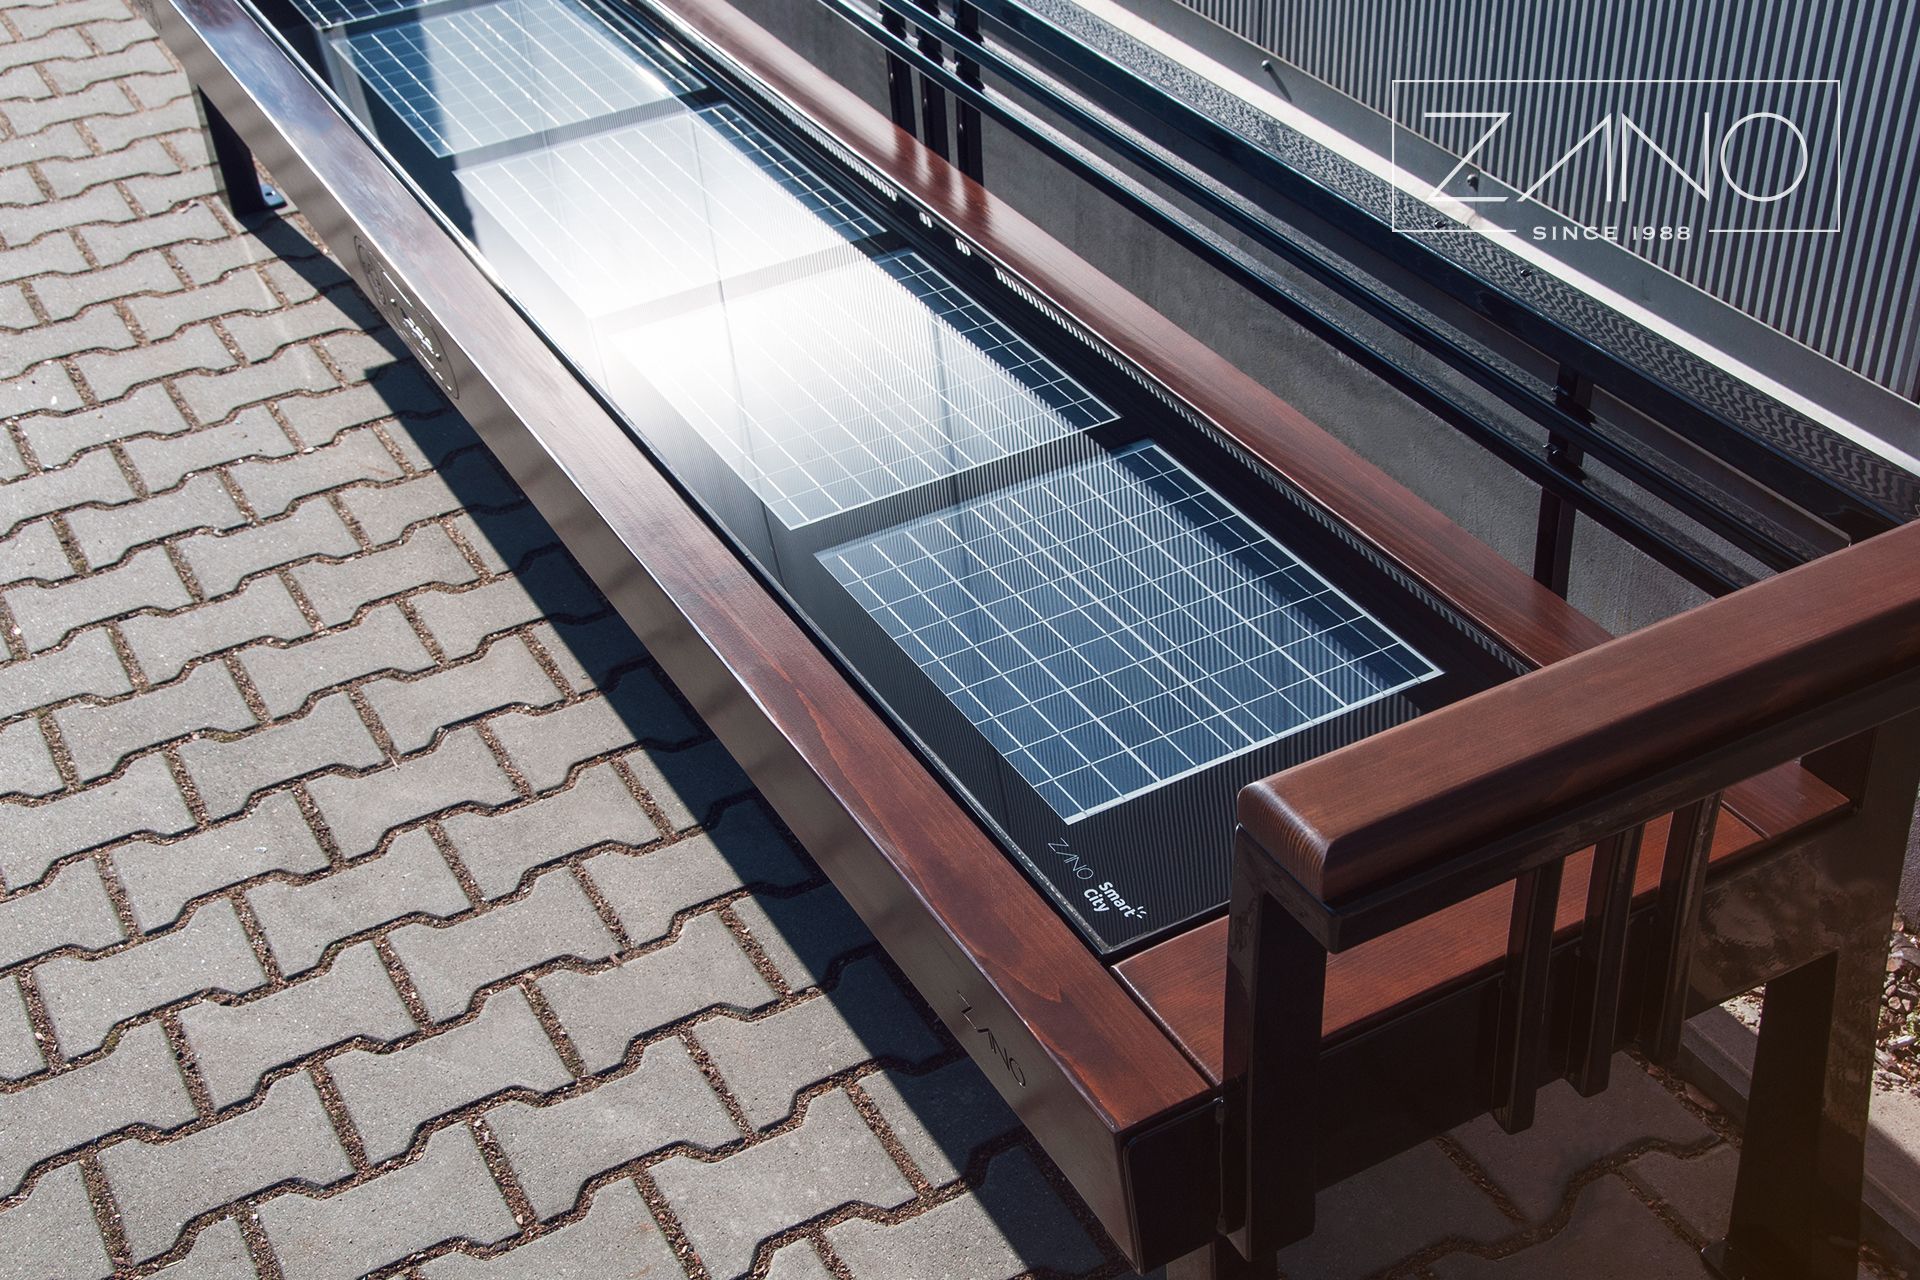 Bench with photovoltaic panels